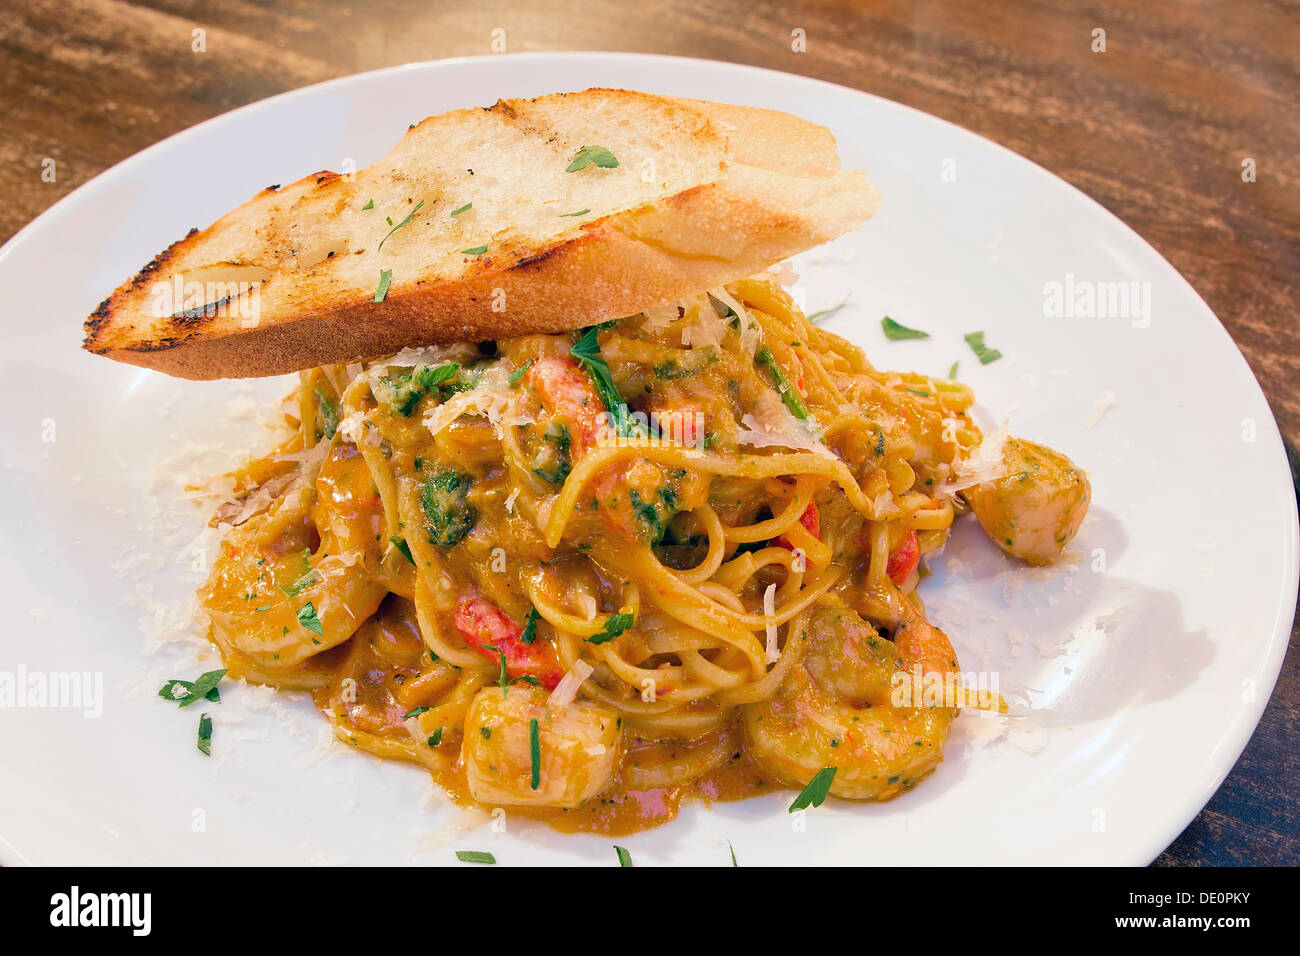 Seafood Spaghetti Pasta Cooked in Tomato Cream Sauce with Prawns Scallops White Fish Basil Bell Peppers and Bread Stock Photo